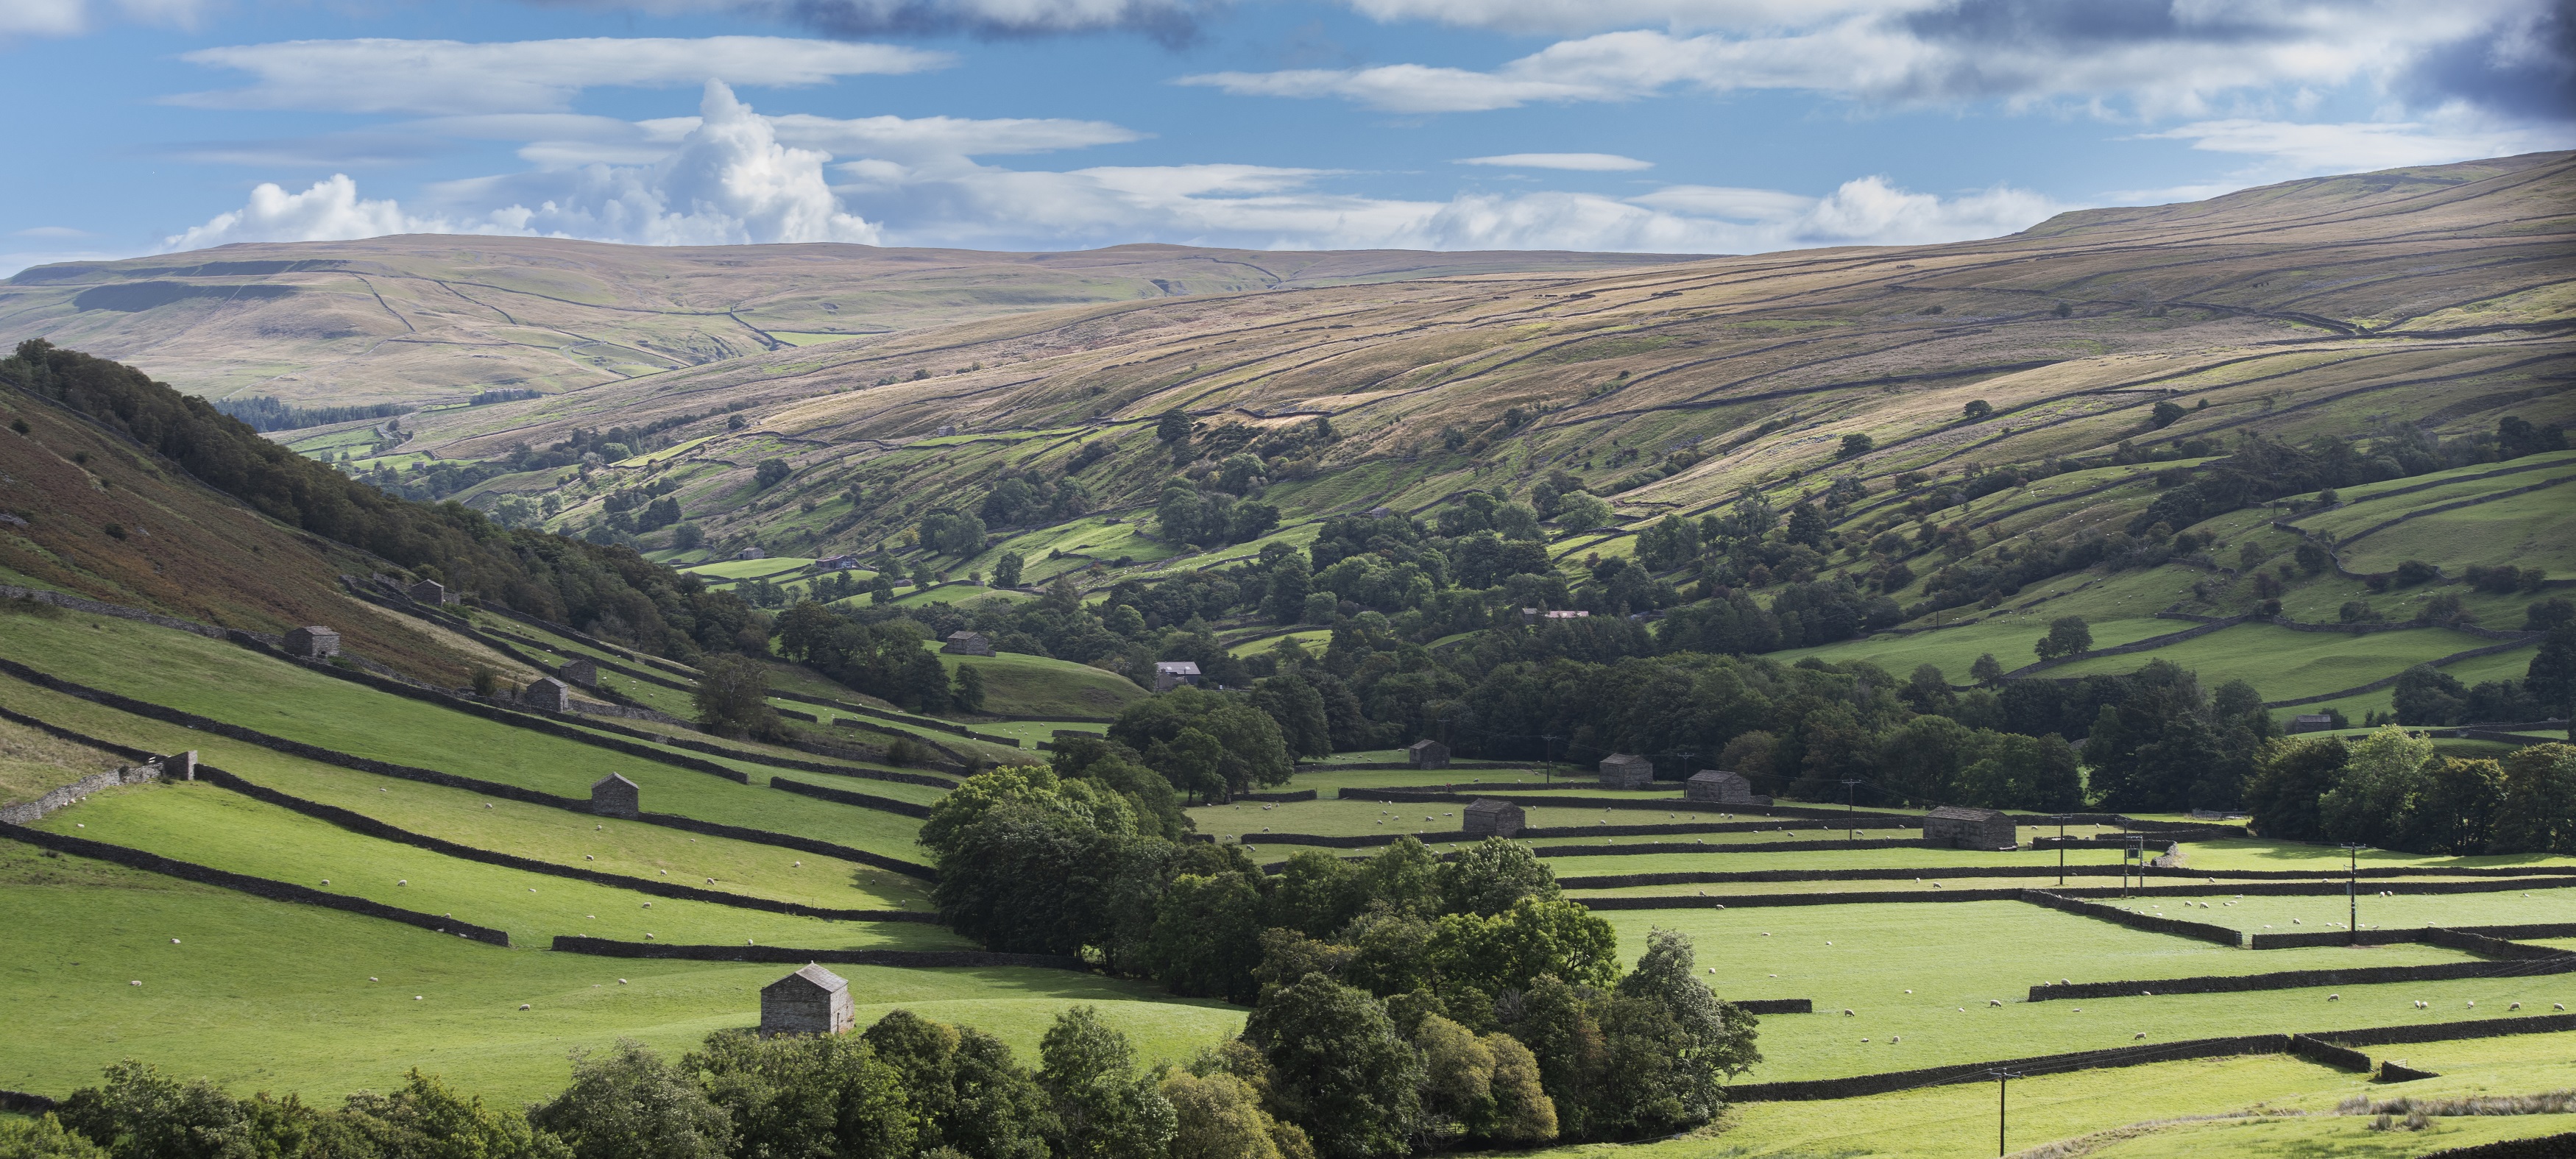  A scenic view of Swaledale in North Yorkshire